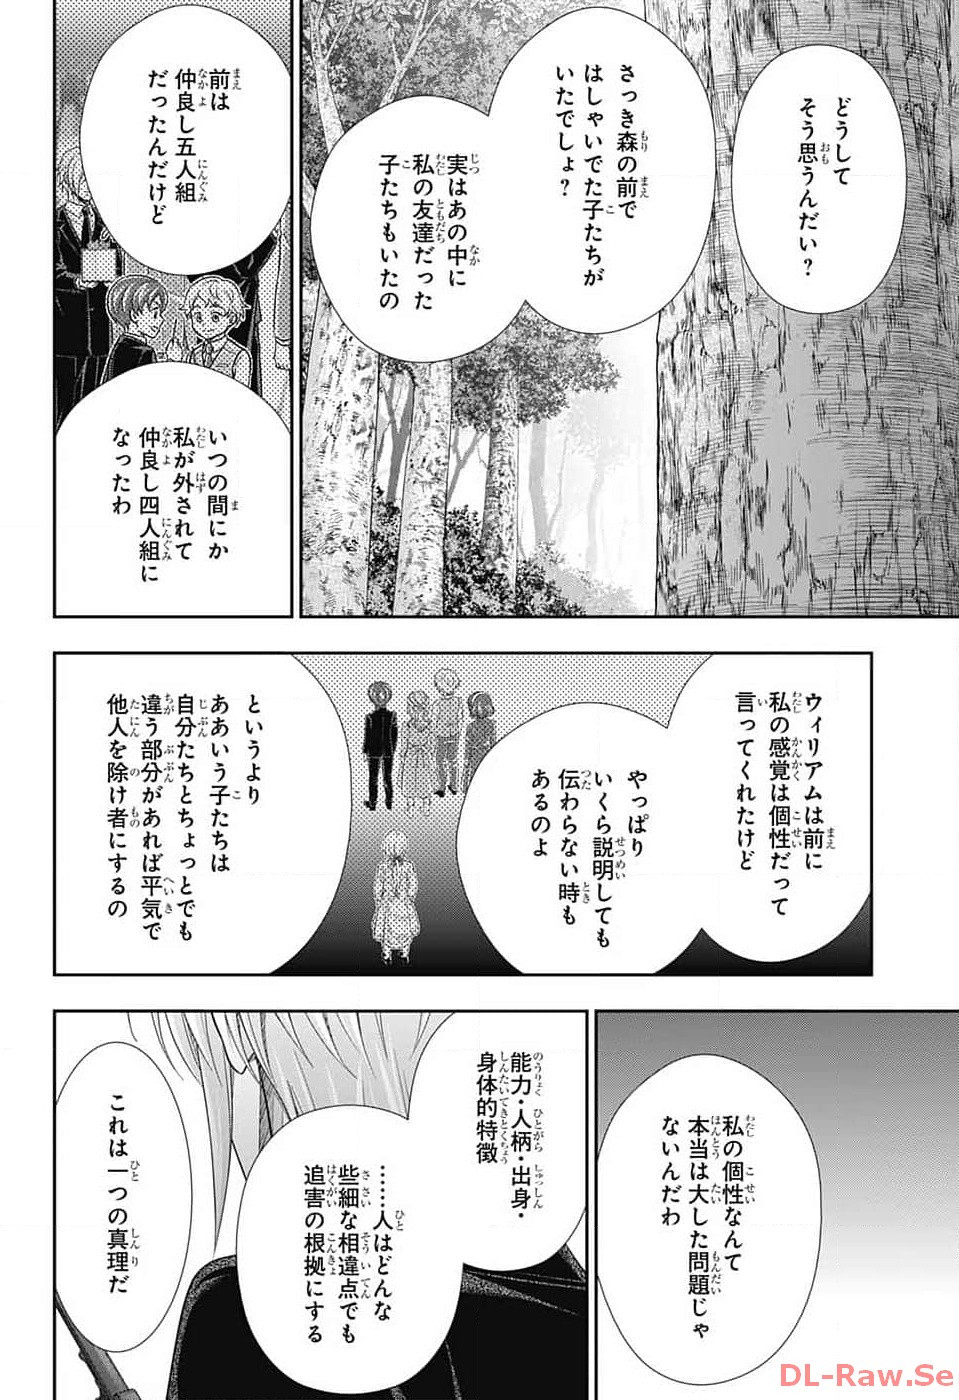 Yuukoku no Moriarty: The Remains - Chapter 10 - Page 2